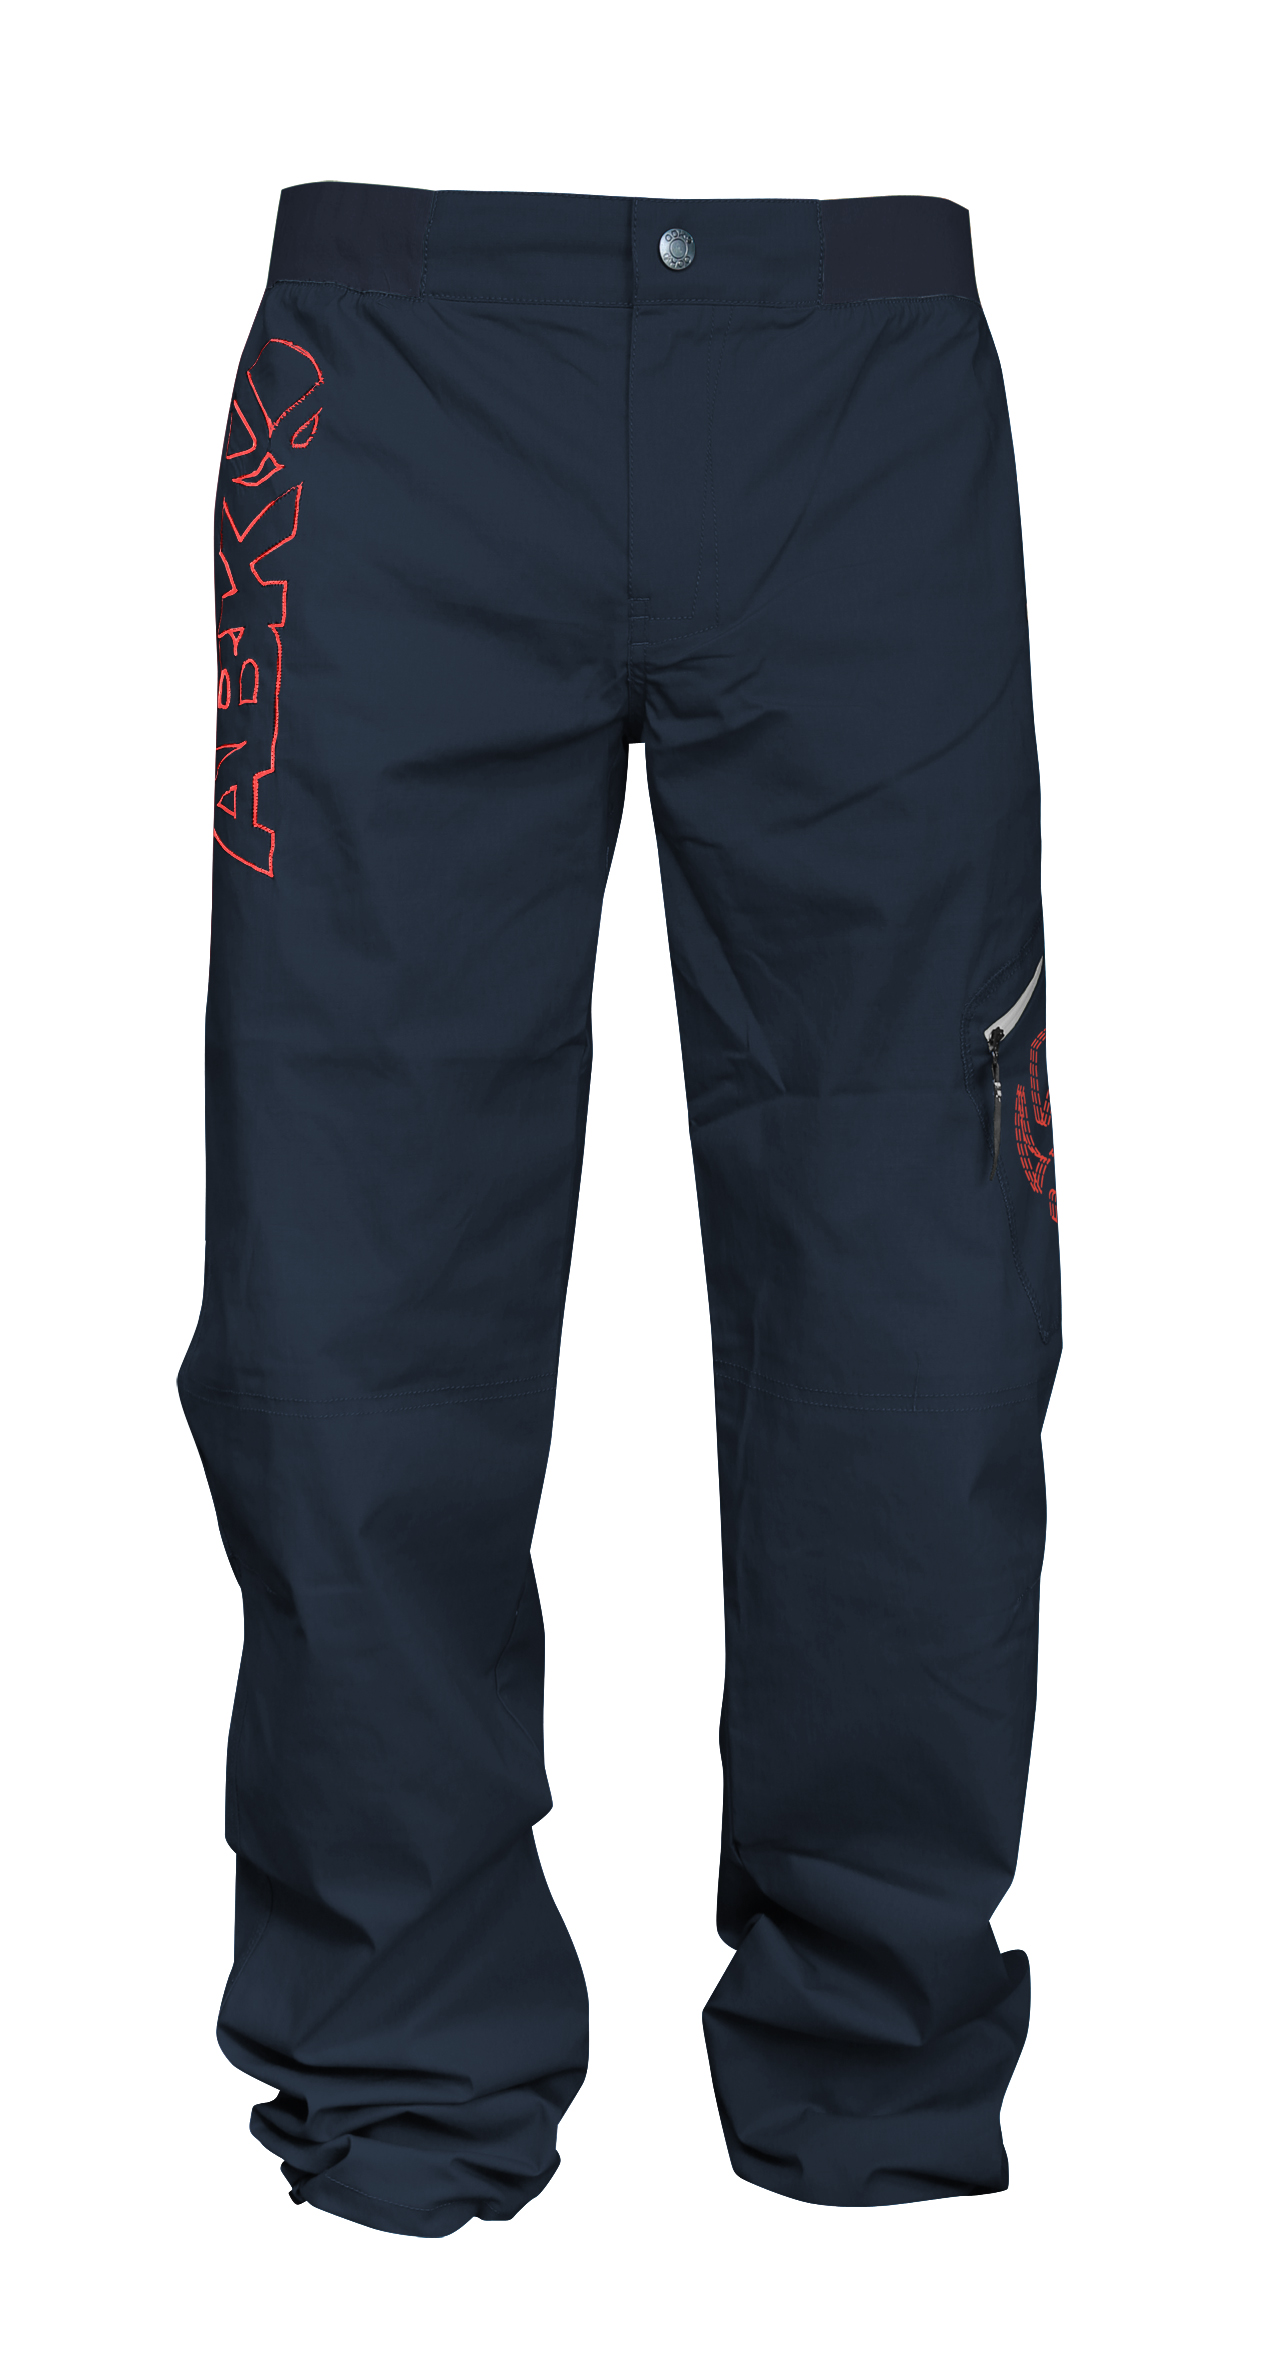 Abk Crux Pant Men S Xl 33 Off With Free S H Campsaver